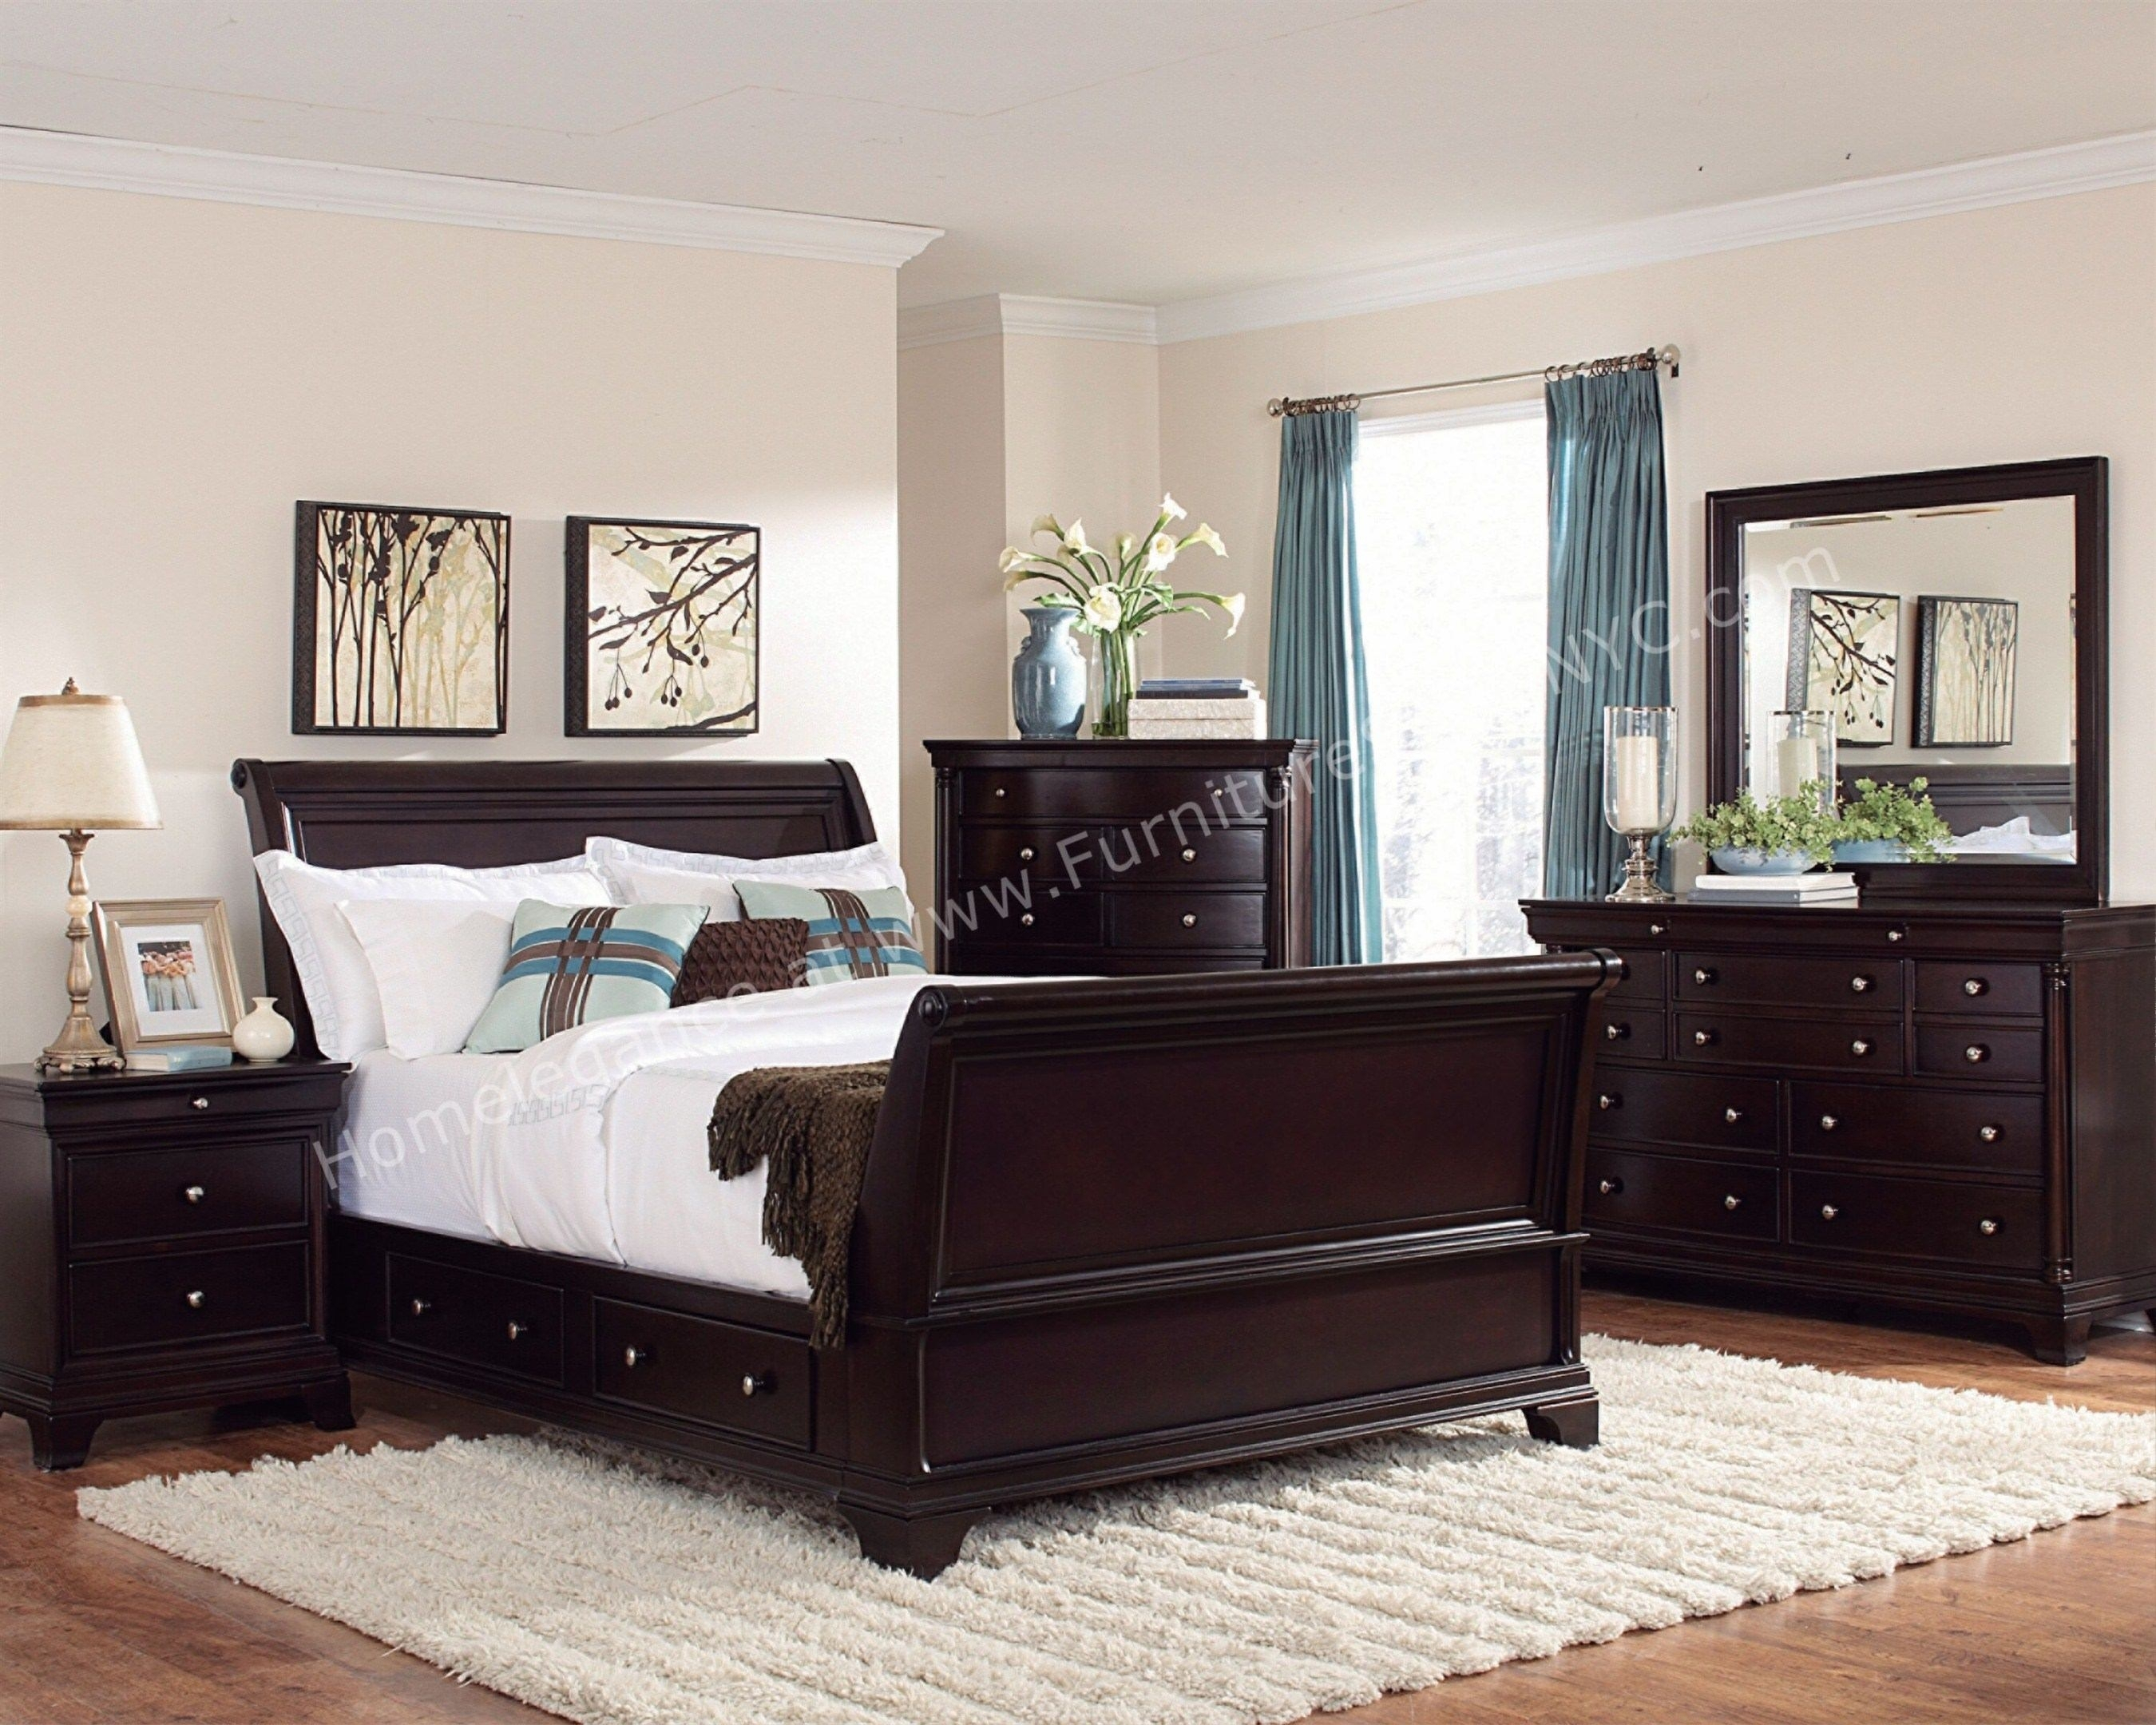 Modern Dark Wood Bedroom Furniture Cileather Home Design Ideas with sizing 2700 X 2160